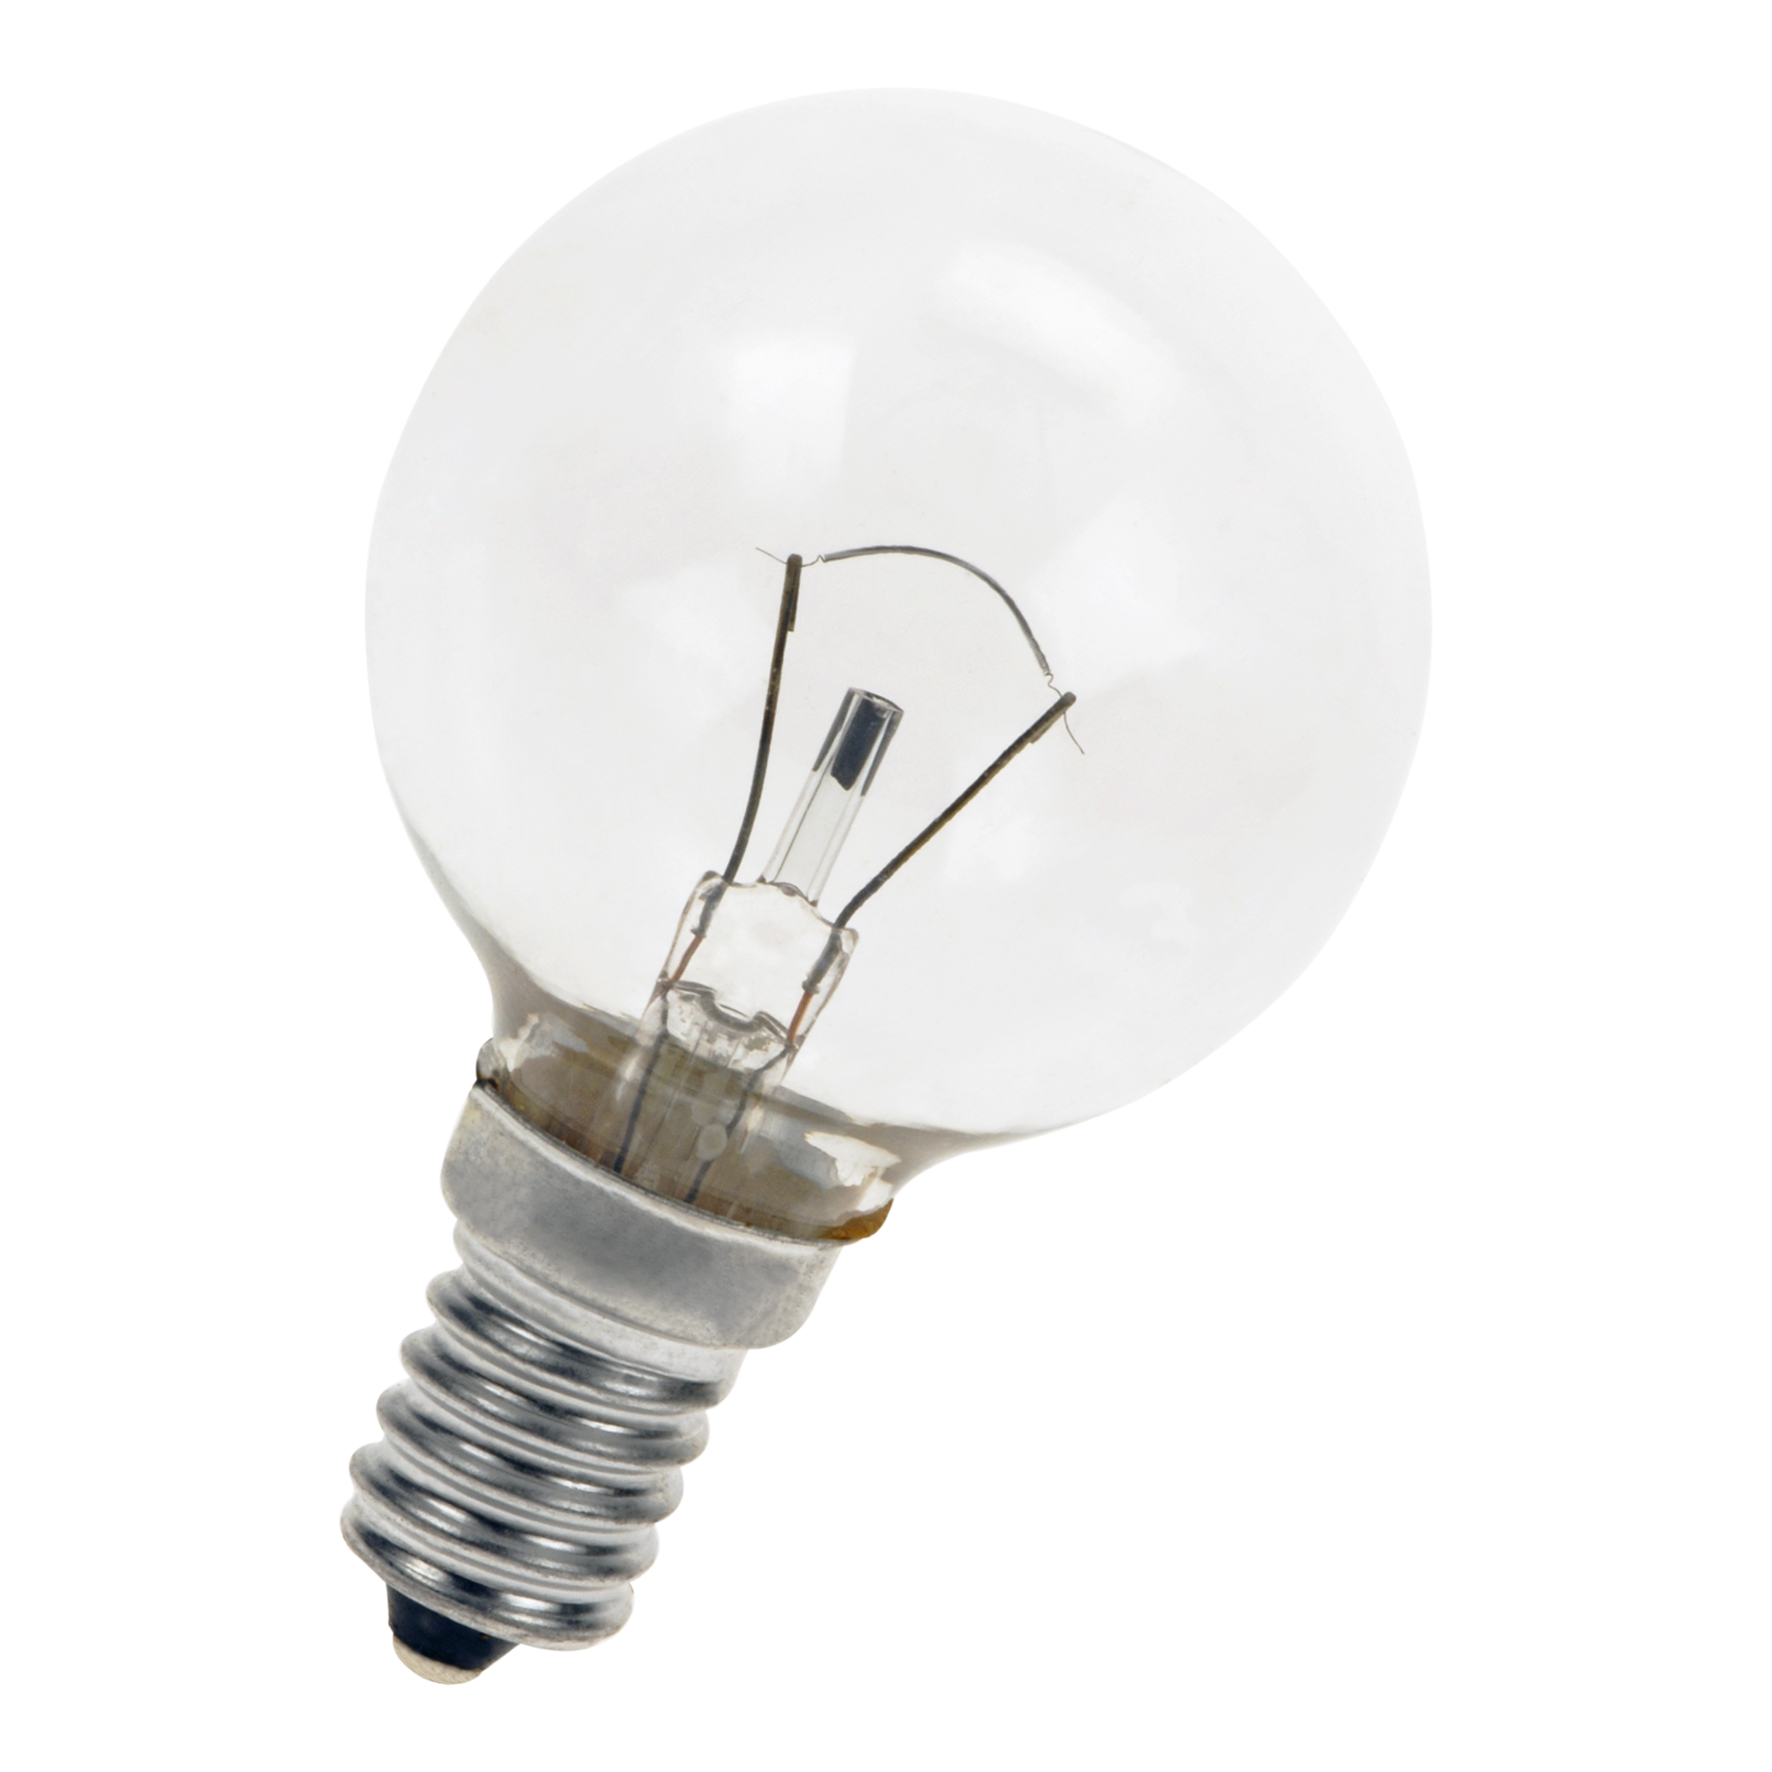 08714681094150 - Sphere-shaped incandescent lamp - Lamps - e-Bailey